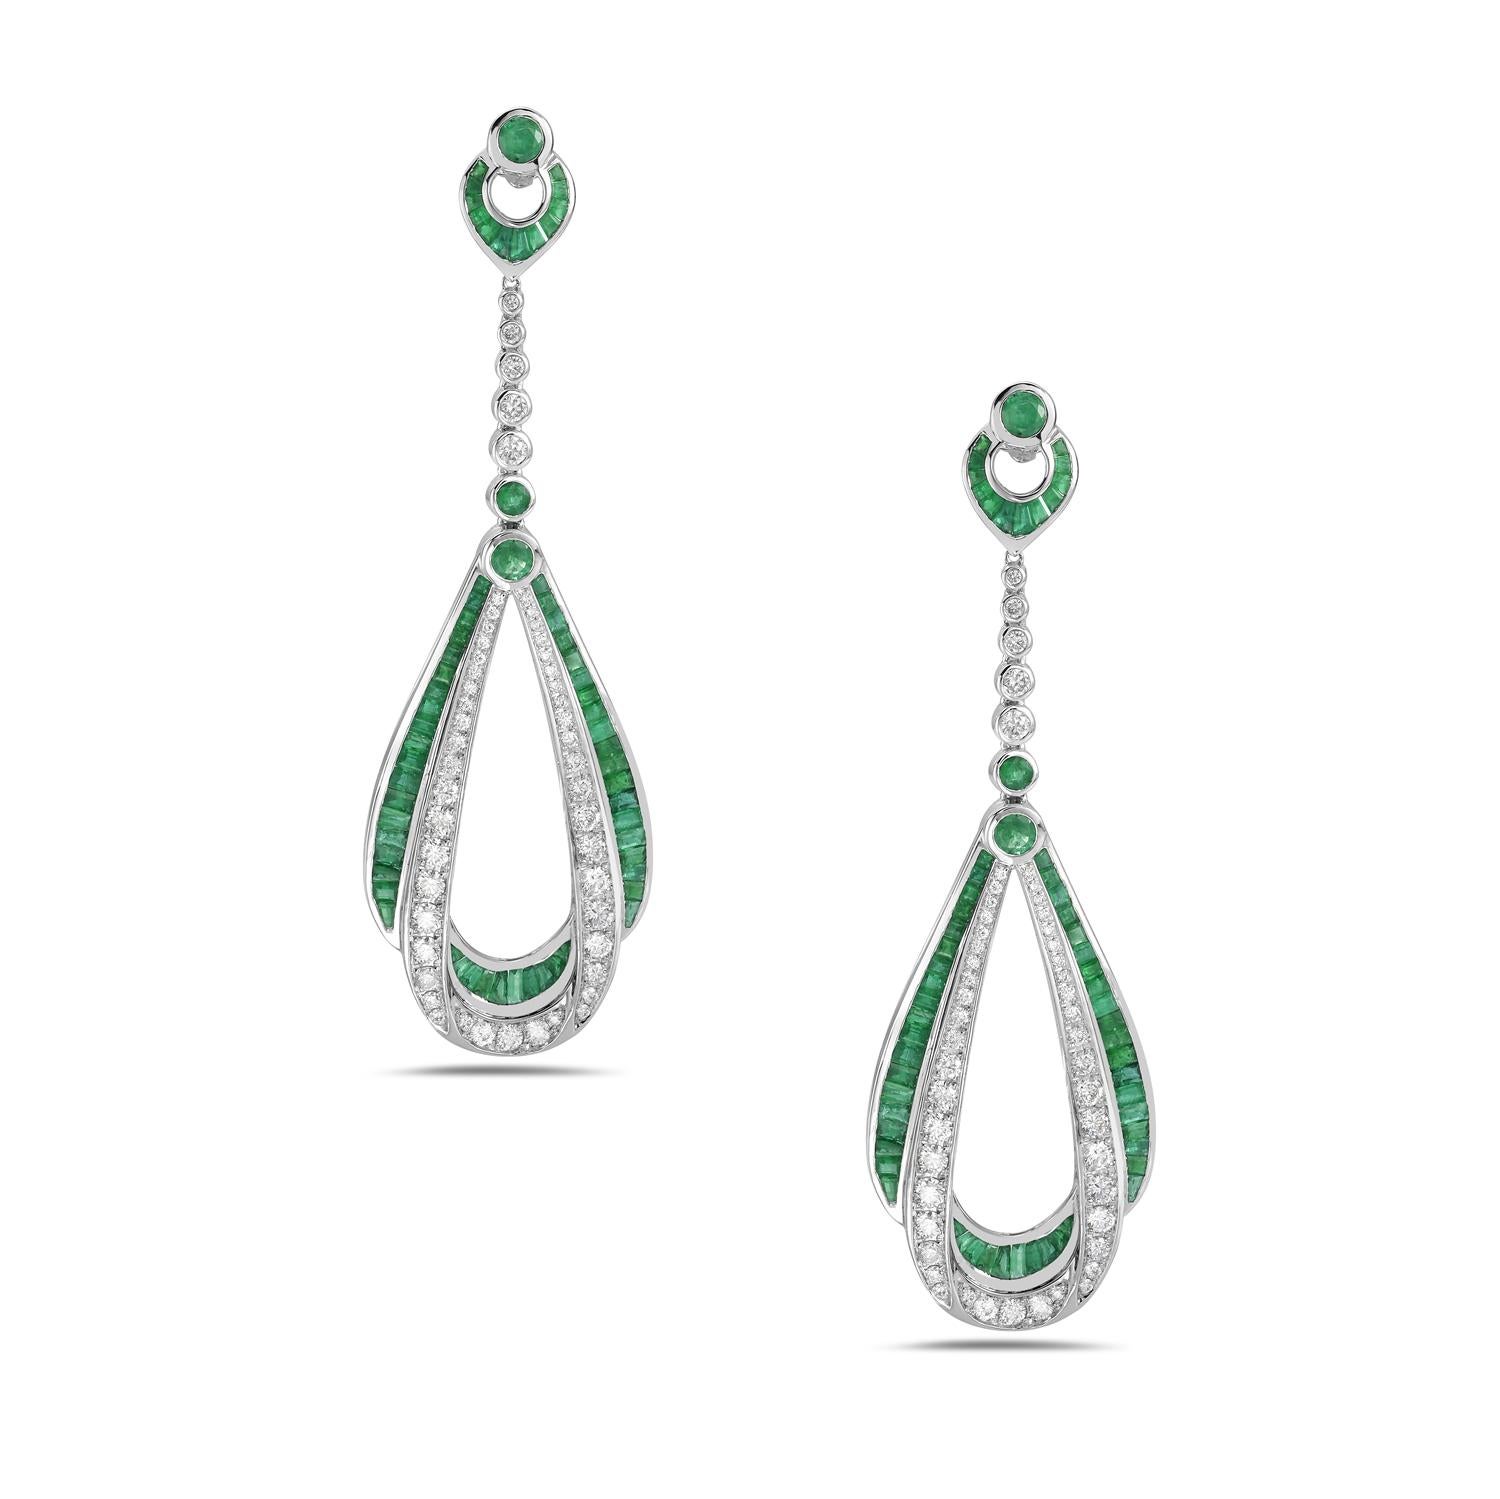 Mixed Cut 5.06 Ct Emerald & Diamond Dangle Earrings Made In 18k White Gold For Sale